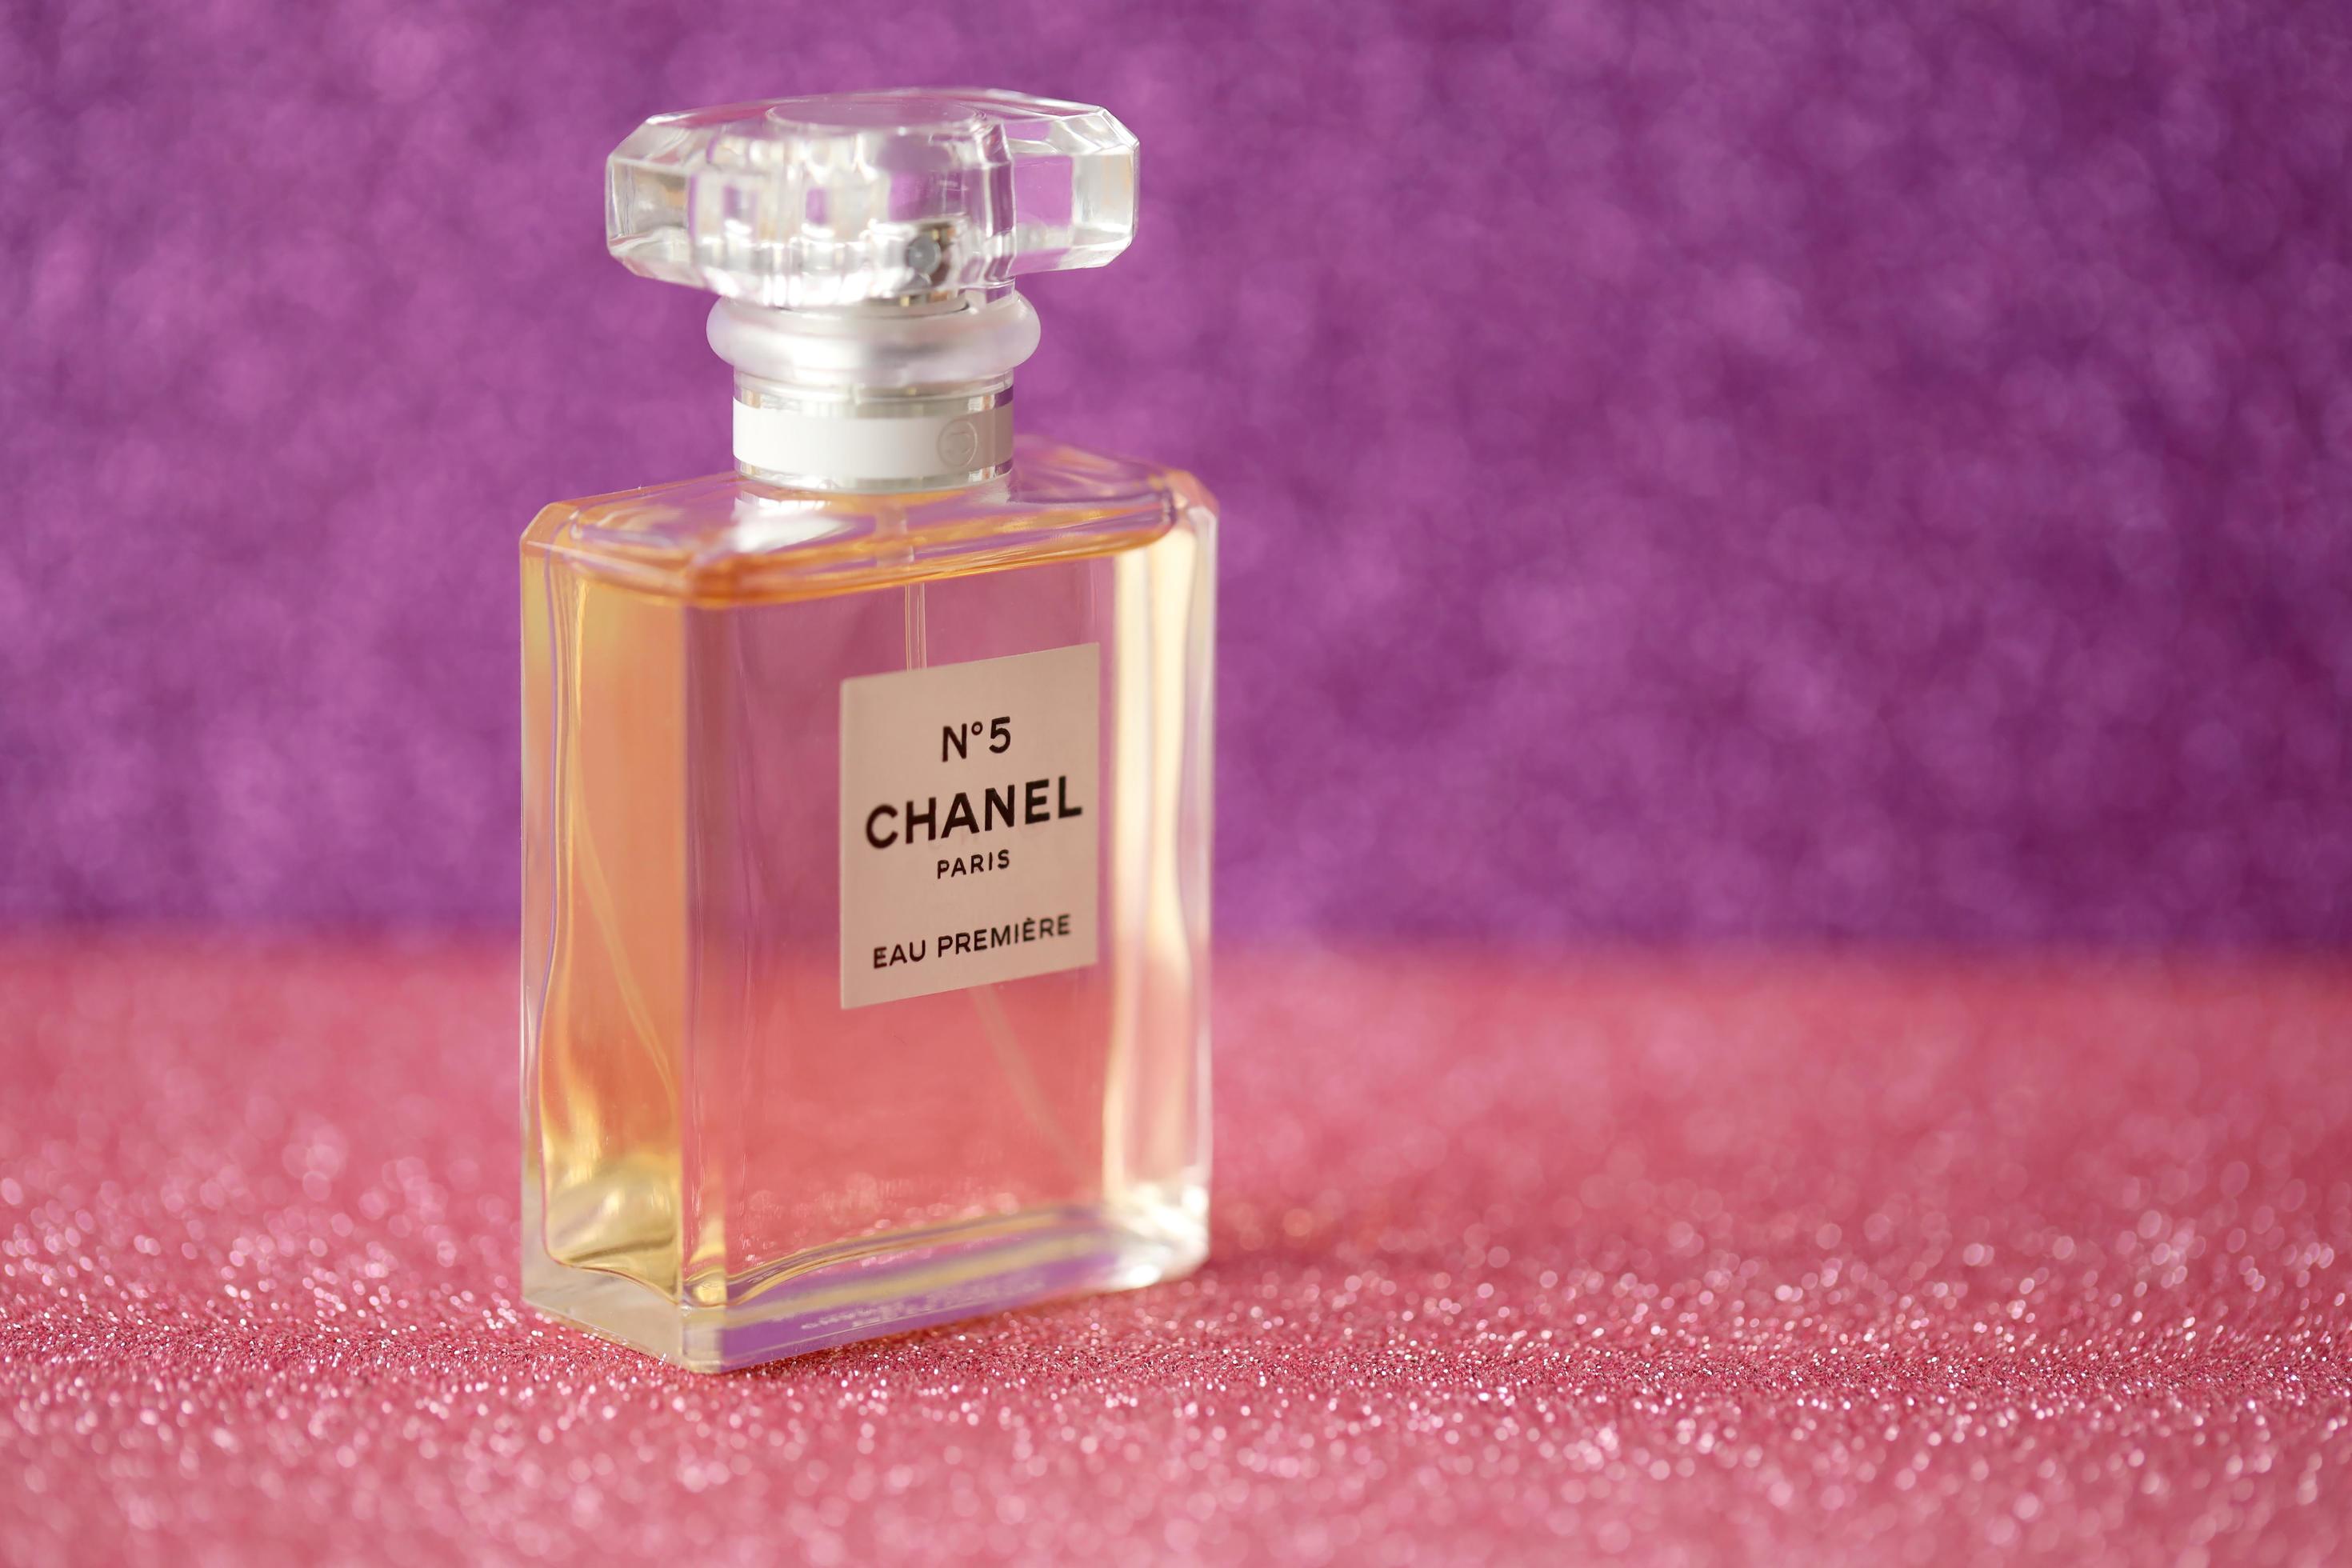 TERNOPIL, UKRAINE - SEPTEMBER 2, 2022 Chanel Number 5 Eau Premiere  worldwide famous french perfume bottle on shiny glitter background in  purple colors 11838107 Stock Photo at Vecteezy